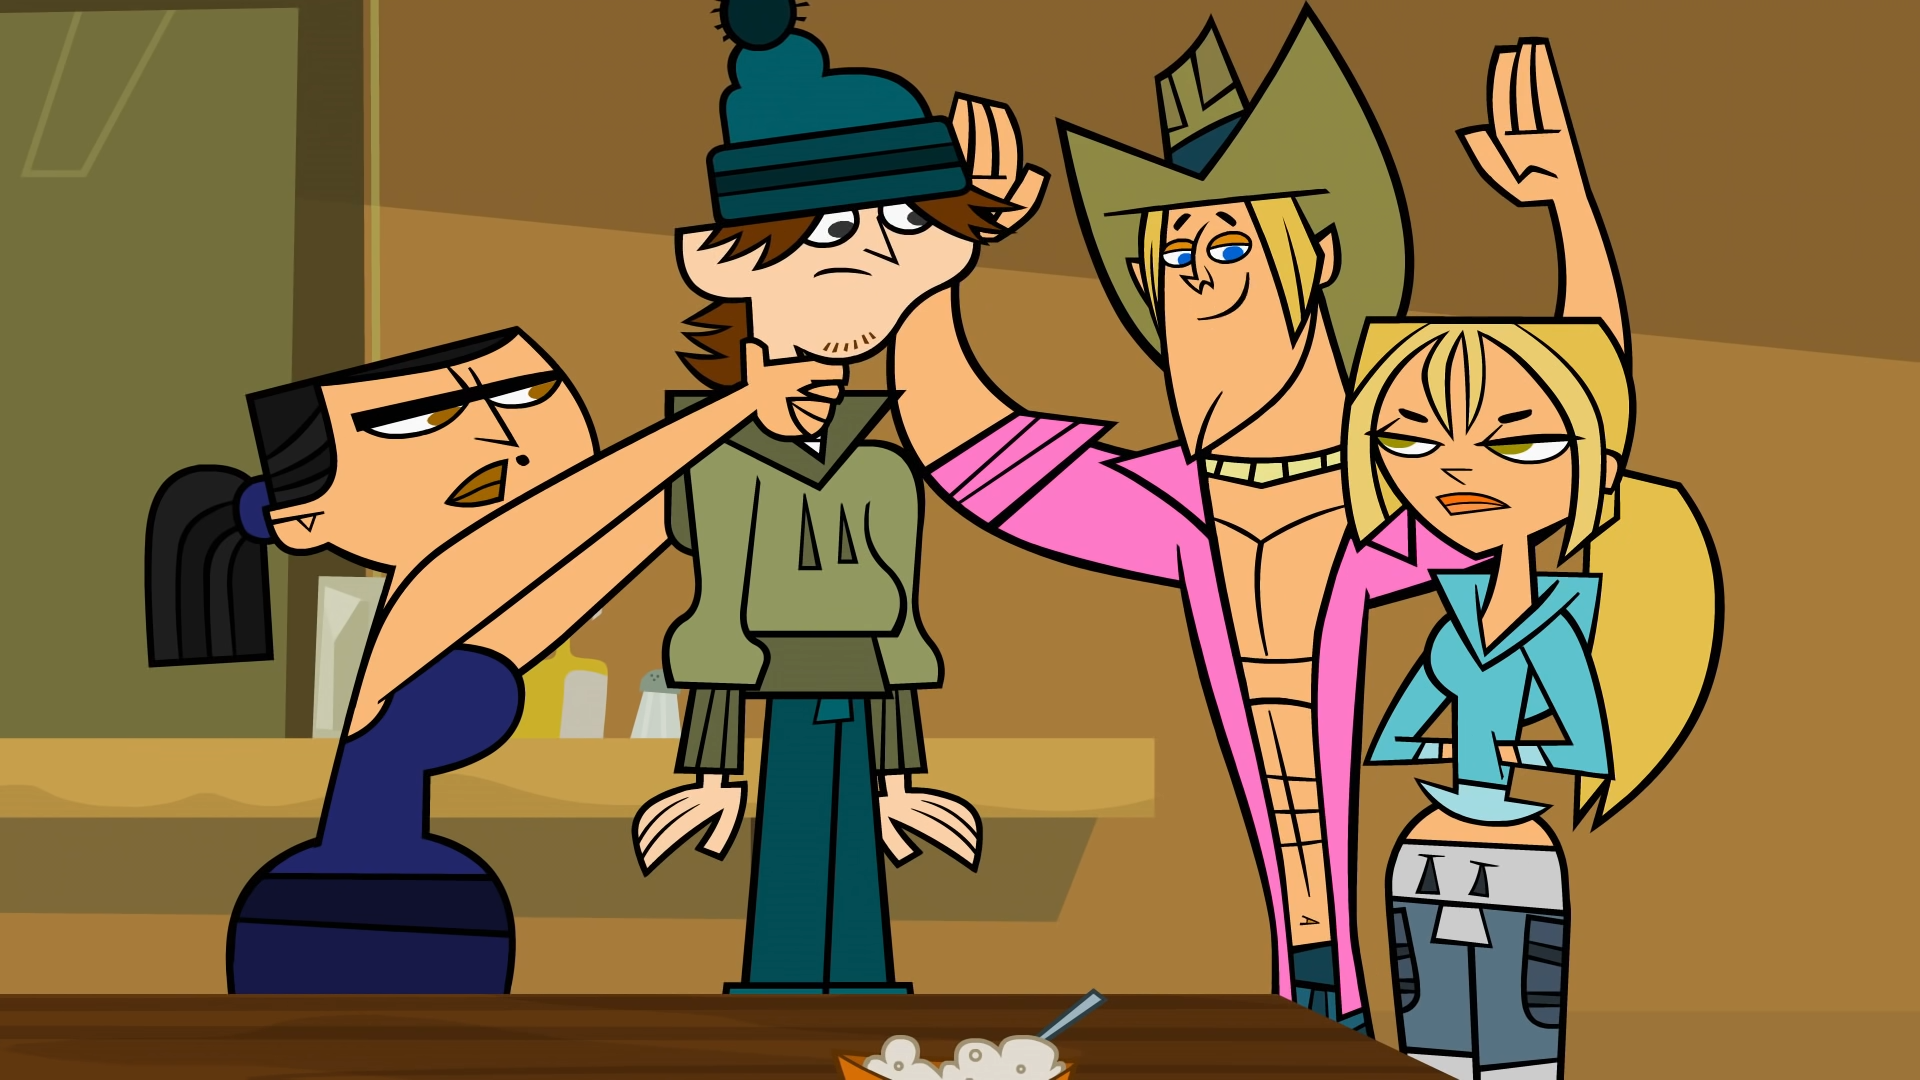 Total Drama Presents: The Ridonculous Race Episode 18 on Make a GIF